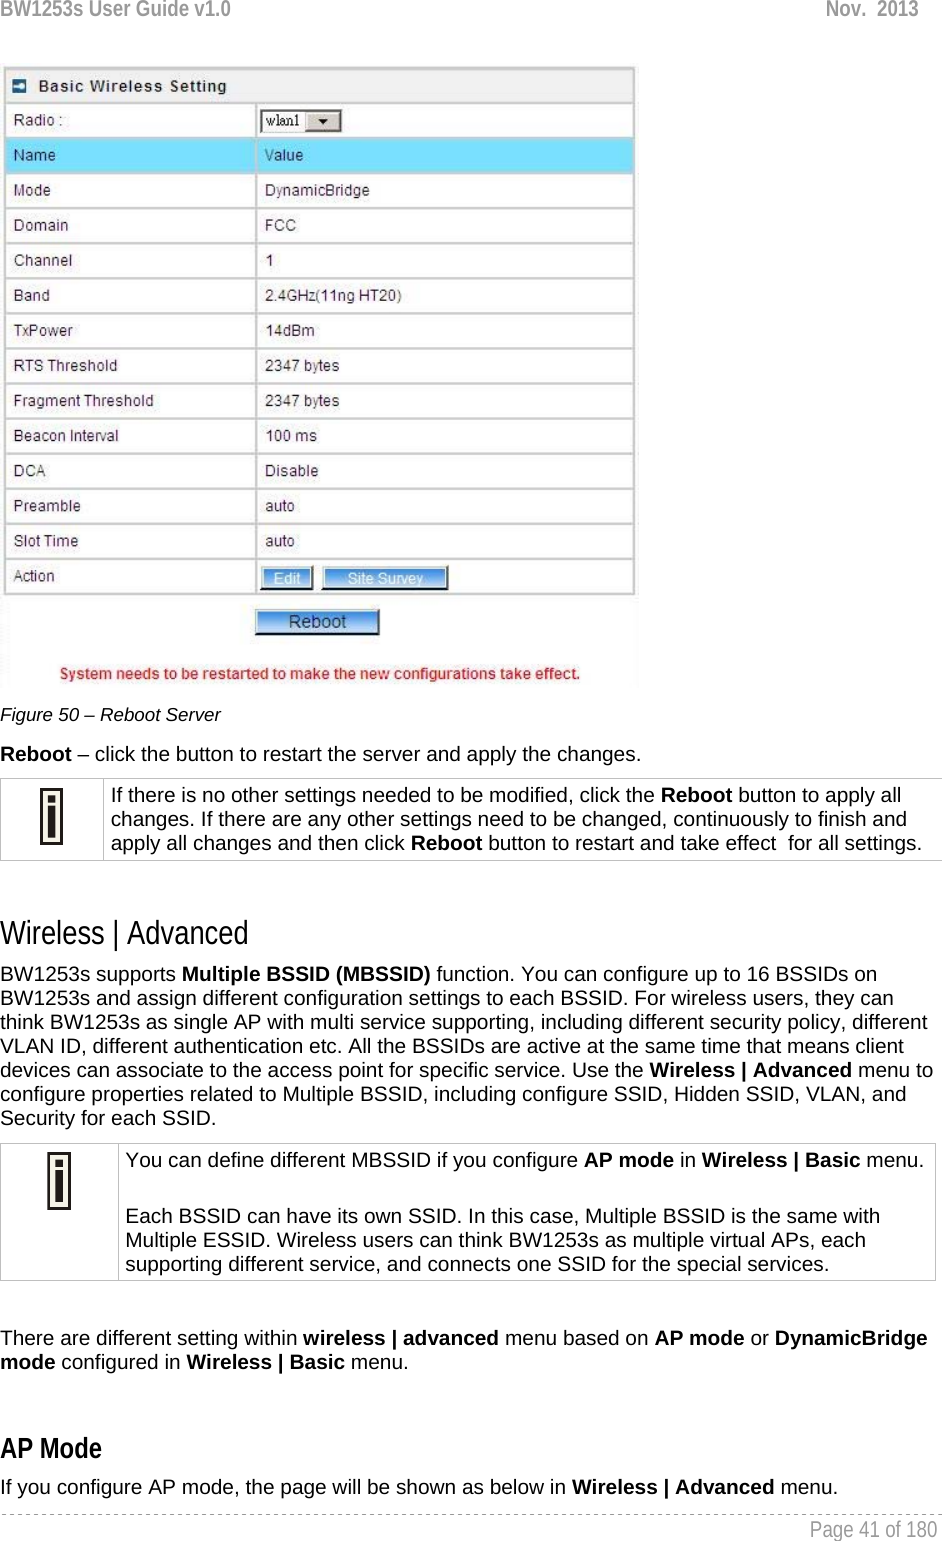 BW1253s User Guide v1.0  Nov.  2013     Page 41 of 180    Figure 50 – Reboot Server Reboot – click the button to restart the server and apply the changes.  If there is no other settings needed to be modified, click the Reboot button to apply all changes. If there are any other settings need to be changed, continuously to finish and apply all changes and then click Reboot button to restart and take effect  for all settings.  Wireless | Advanced  BW1253s supports Multiple BSSID (MBSSID) function. You can configure up to 16 BSSIDs on BW1253s and assign different configuration settings to each BSSID. For wireless users, they can think BW1253s as single AP with multi service supporting, including different security policy, different VLAN ID, different authentication etc. All the BSSIDs are active at the same time that means client devices can associate to the access point for specific service. Use the Wireless | Advanced menu to configure properties related to Multiple BSSID, including configure SSID, Hidden SSID, VLAN, and Security for each SSID.  You can define different MBSSID if you configure AP mode in Wireless | Basic menu. Each BSSID can have its own SSID. In this case, Multiple BSSID is the same with Multiple ESSID. Wireless users can think BW1253s as multiple virtual APs, each supporting different service, and connects one SSID for the special services.   There are different setting within wireless | advanced menu based on AP mode or DynamicBridge mode configured in Wireless | Basic menu.  AP Mode If you configure AP mode, the page will be shown as below in Wireless | Advanced menu. 